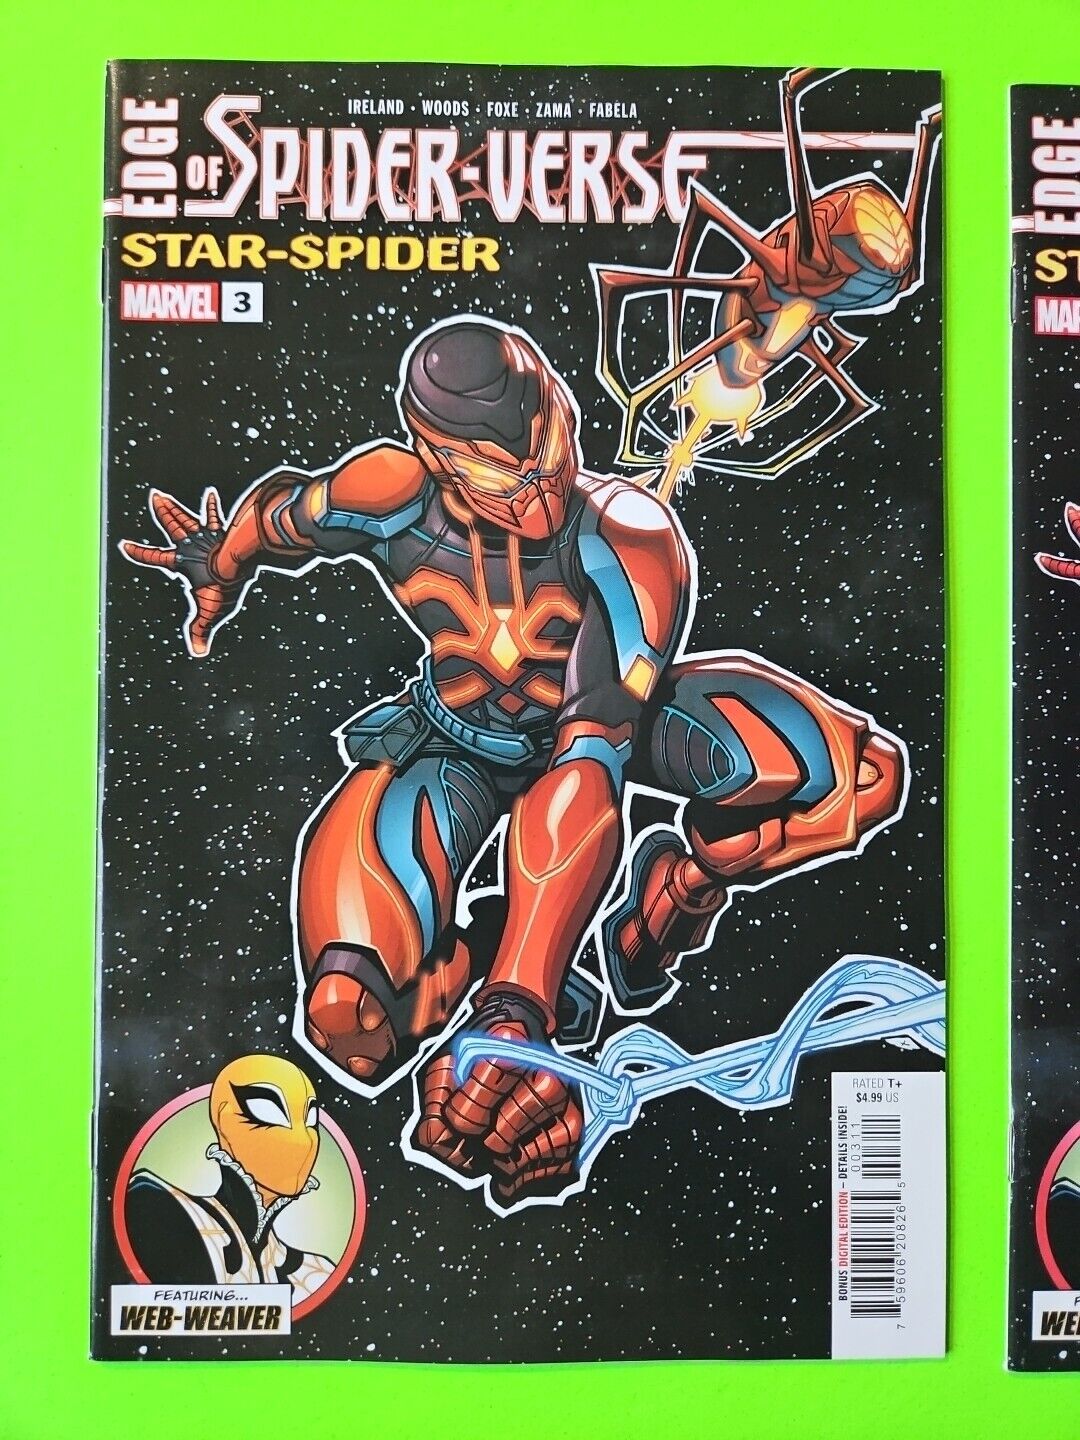 Edge of Spider-Verse #3 Marvel FIRST STAR SPIDER Ramos Variant NM+ CGC IT